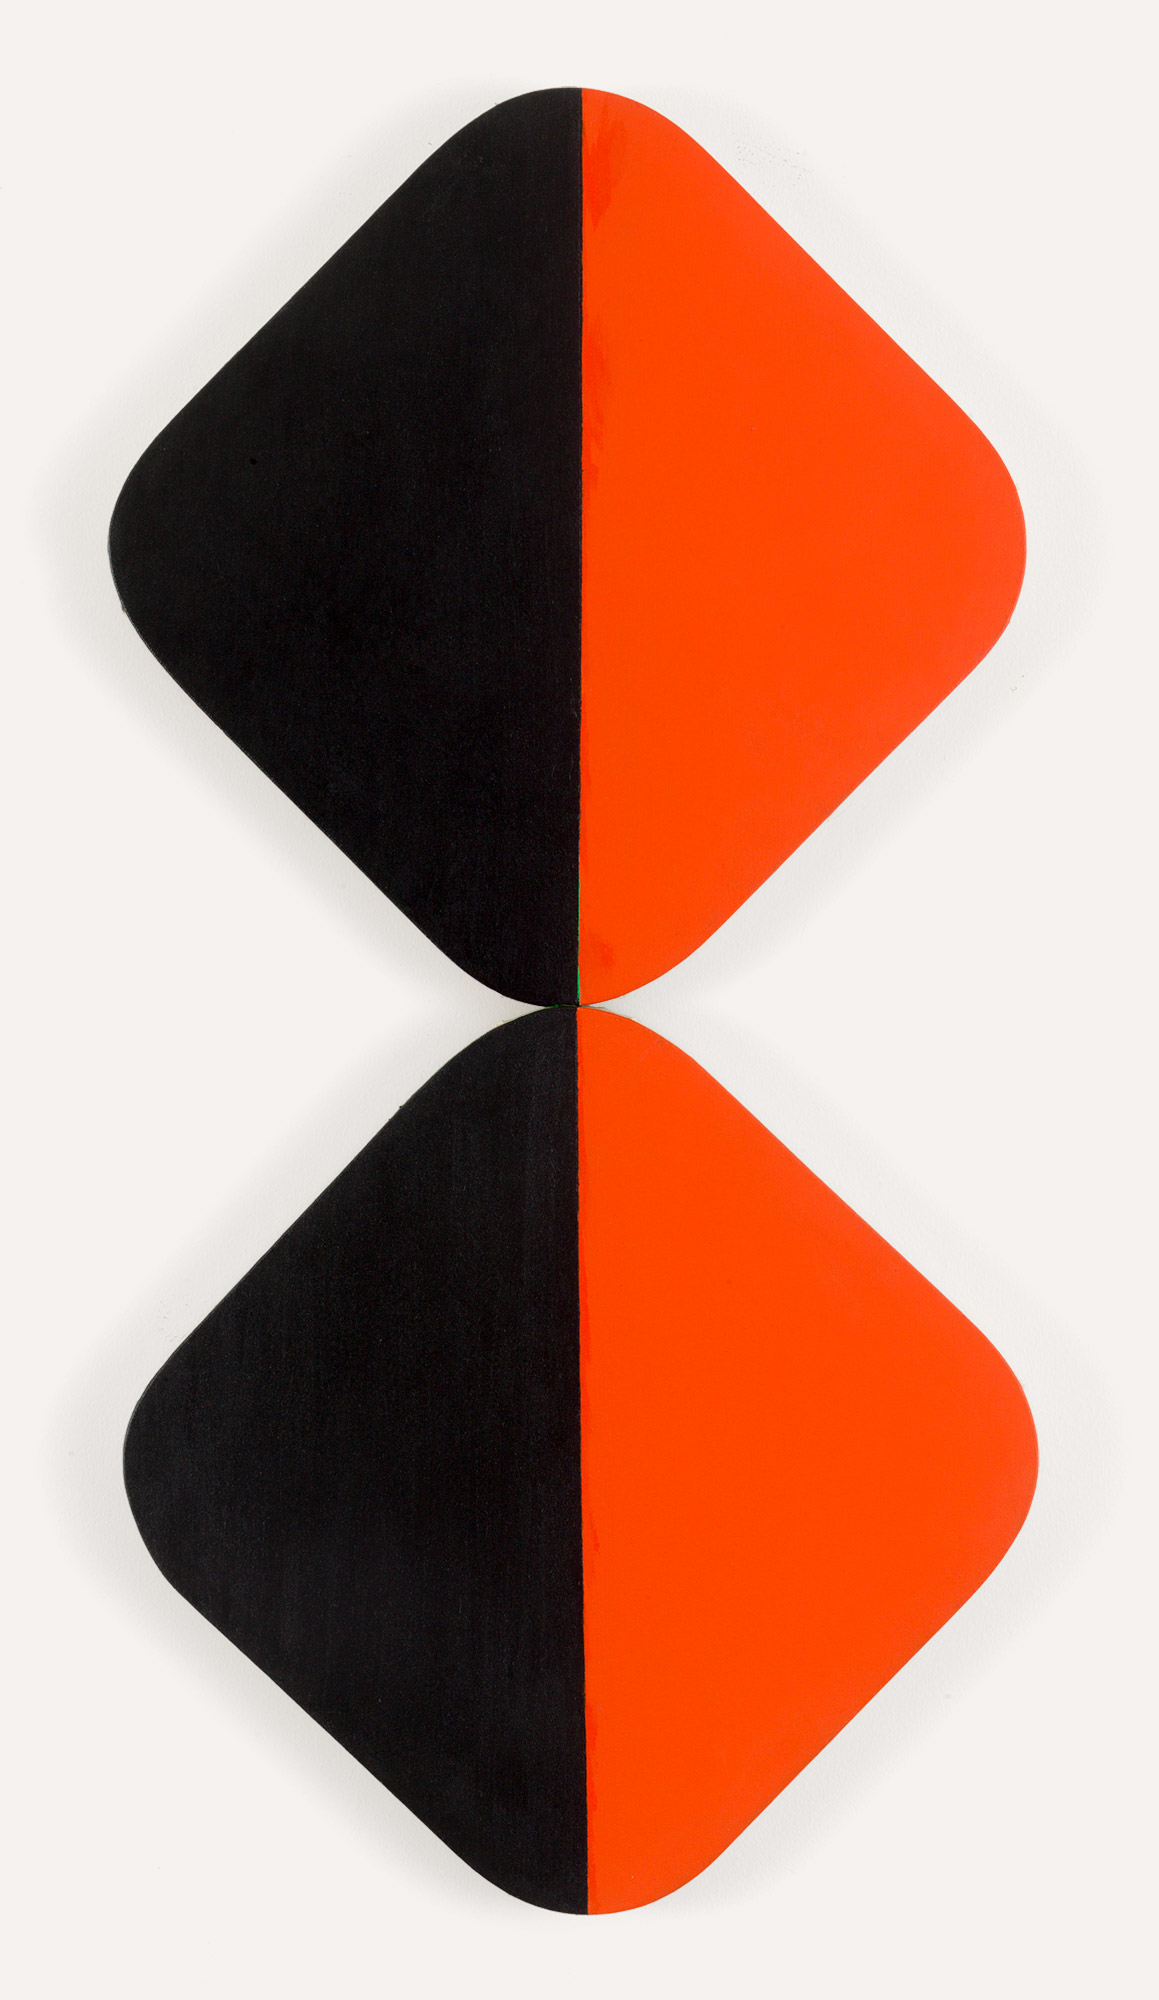 Two rounded corner square canvases turned like diamonds stacked, the canvases are split down the middle, the left half black and the right half bright red.